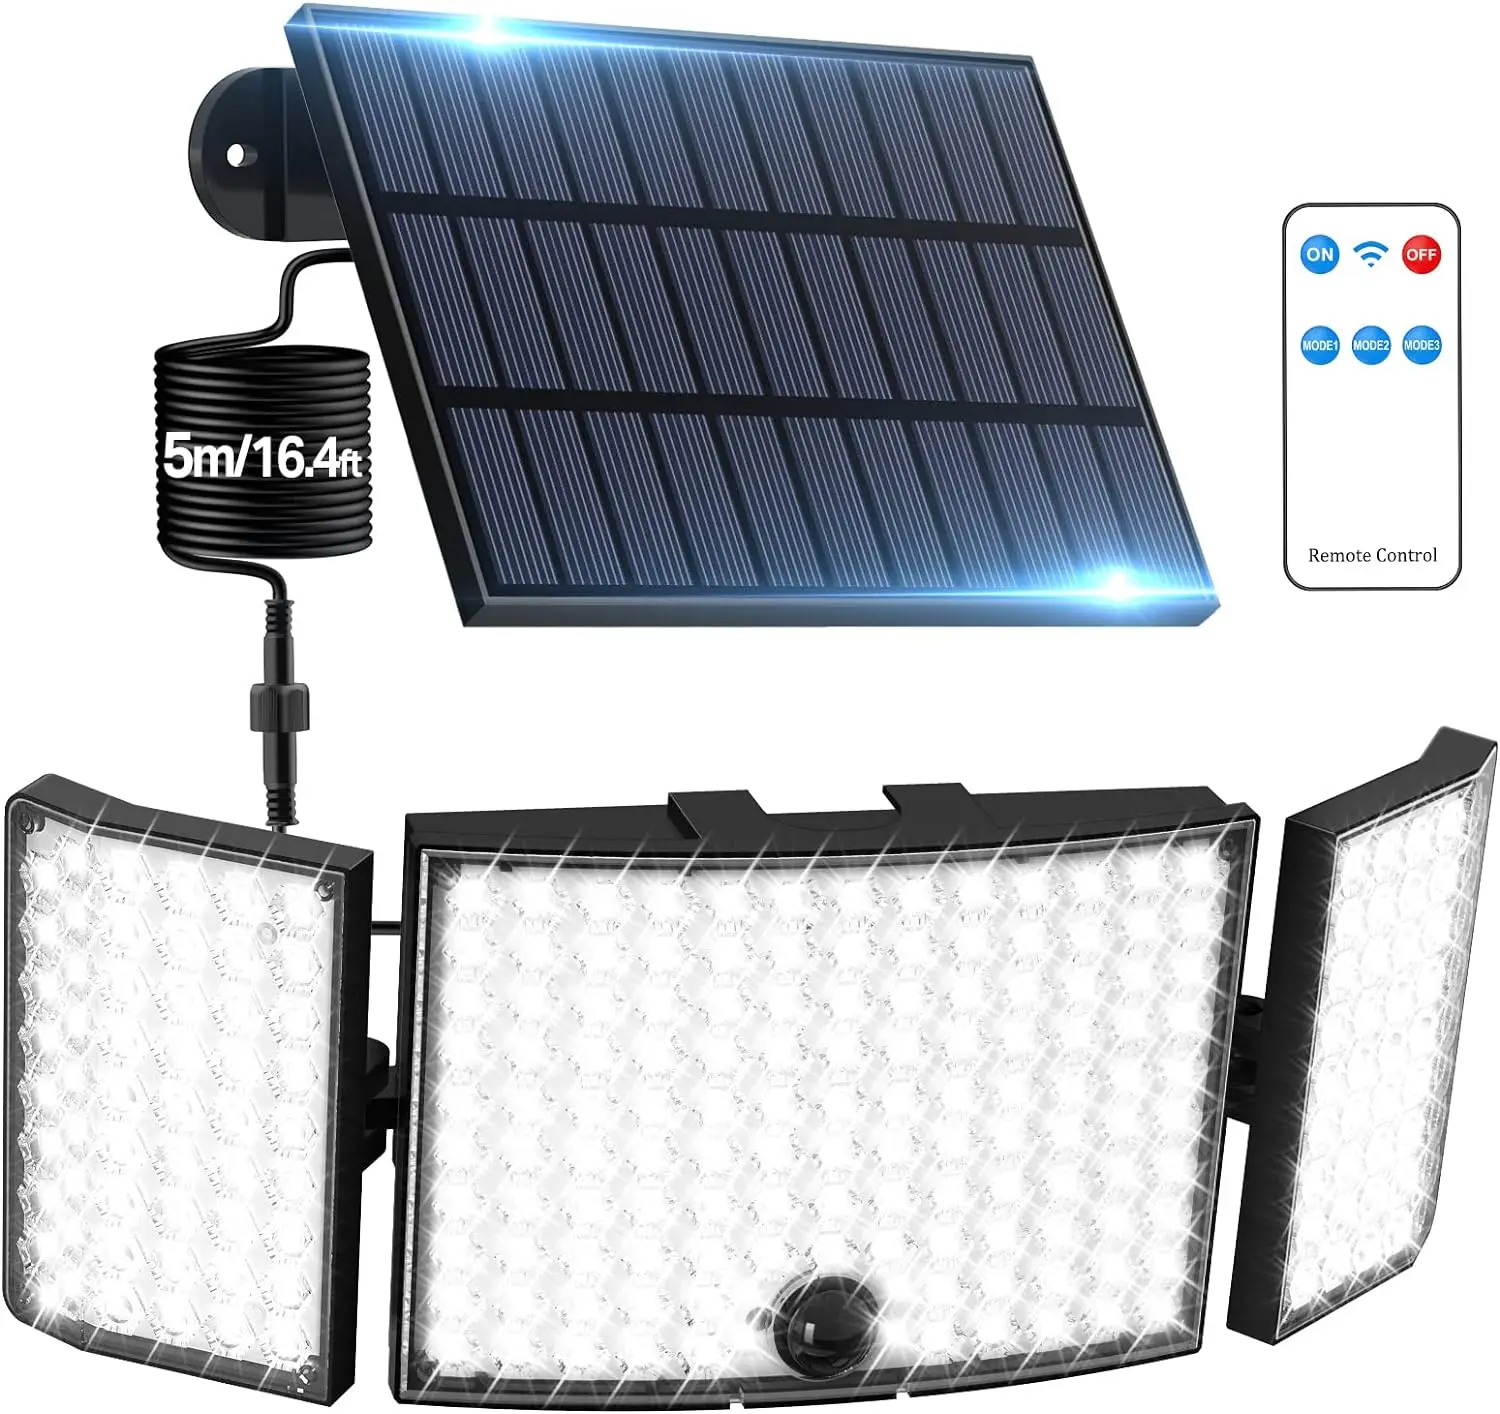 

234 LED Outdoor Solar Light 3 Lighting Mode with Motion Sensor Remote Control IP65 Waterproof for Patio Garage Security Light